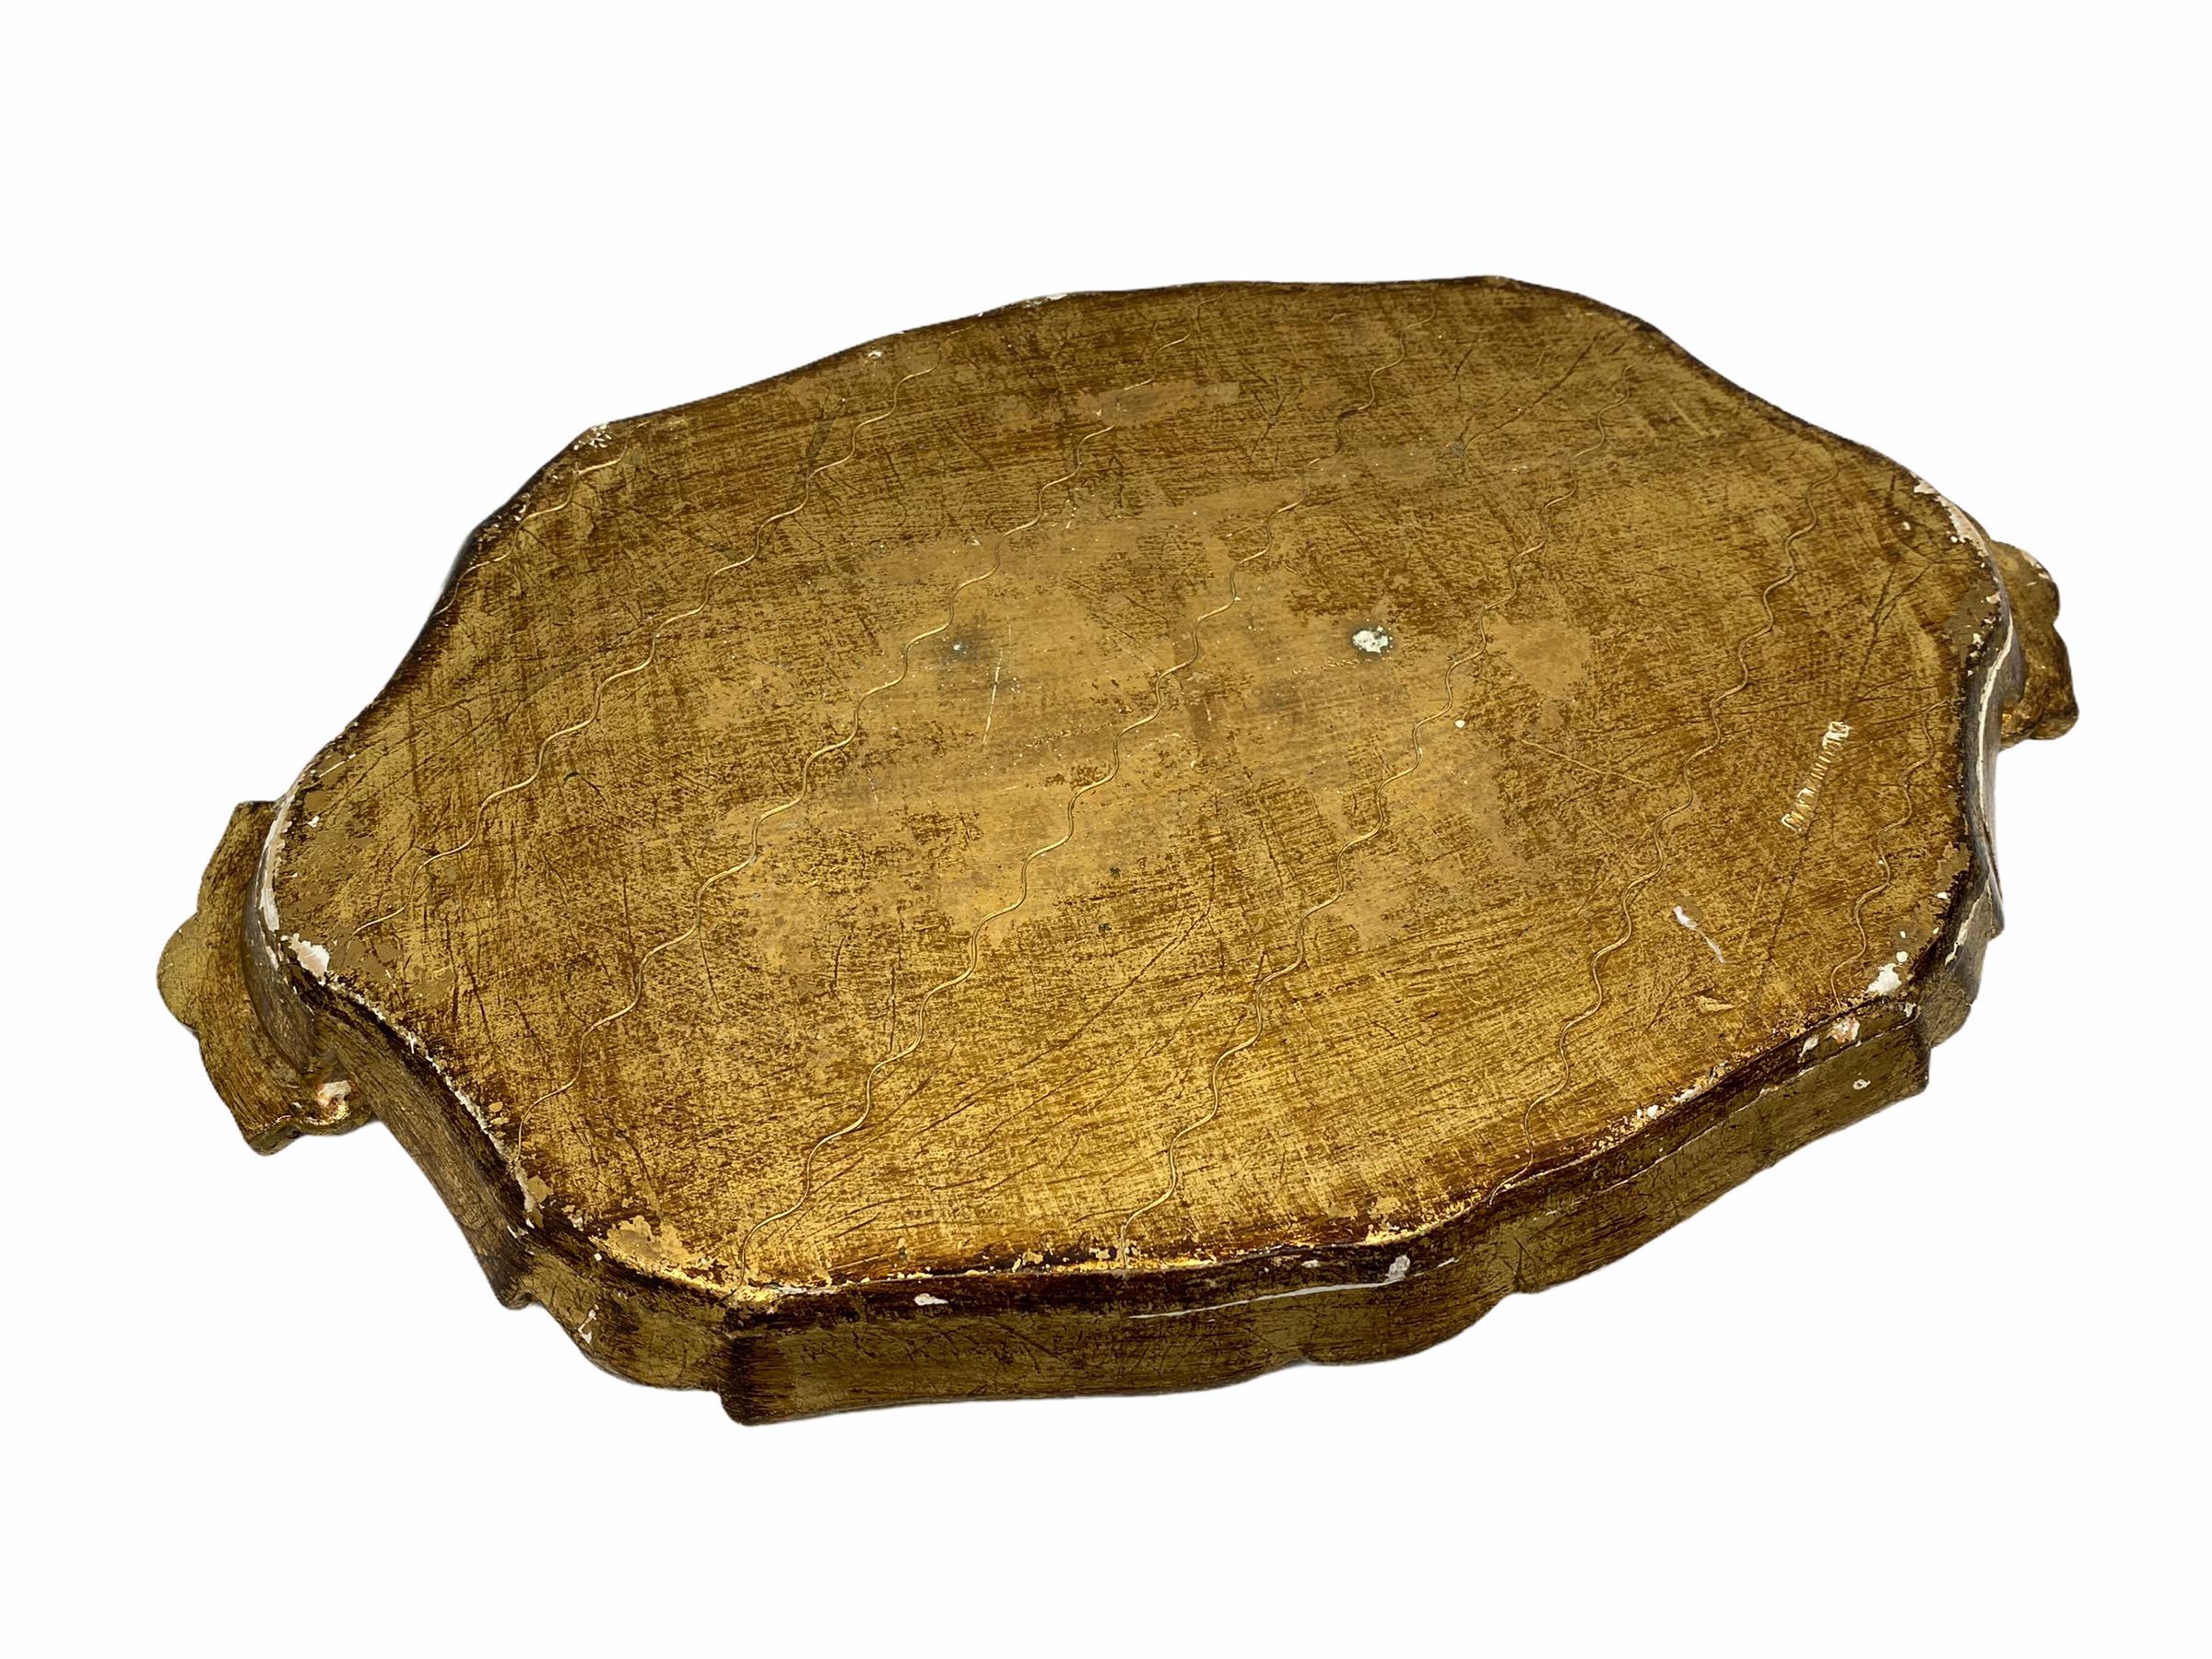 Hollywood Regency Petite Italian Florentine Gold Gilt-Wood Tray Toleware Tole, 1960s For Sale